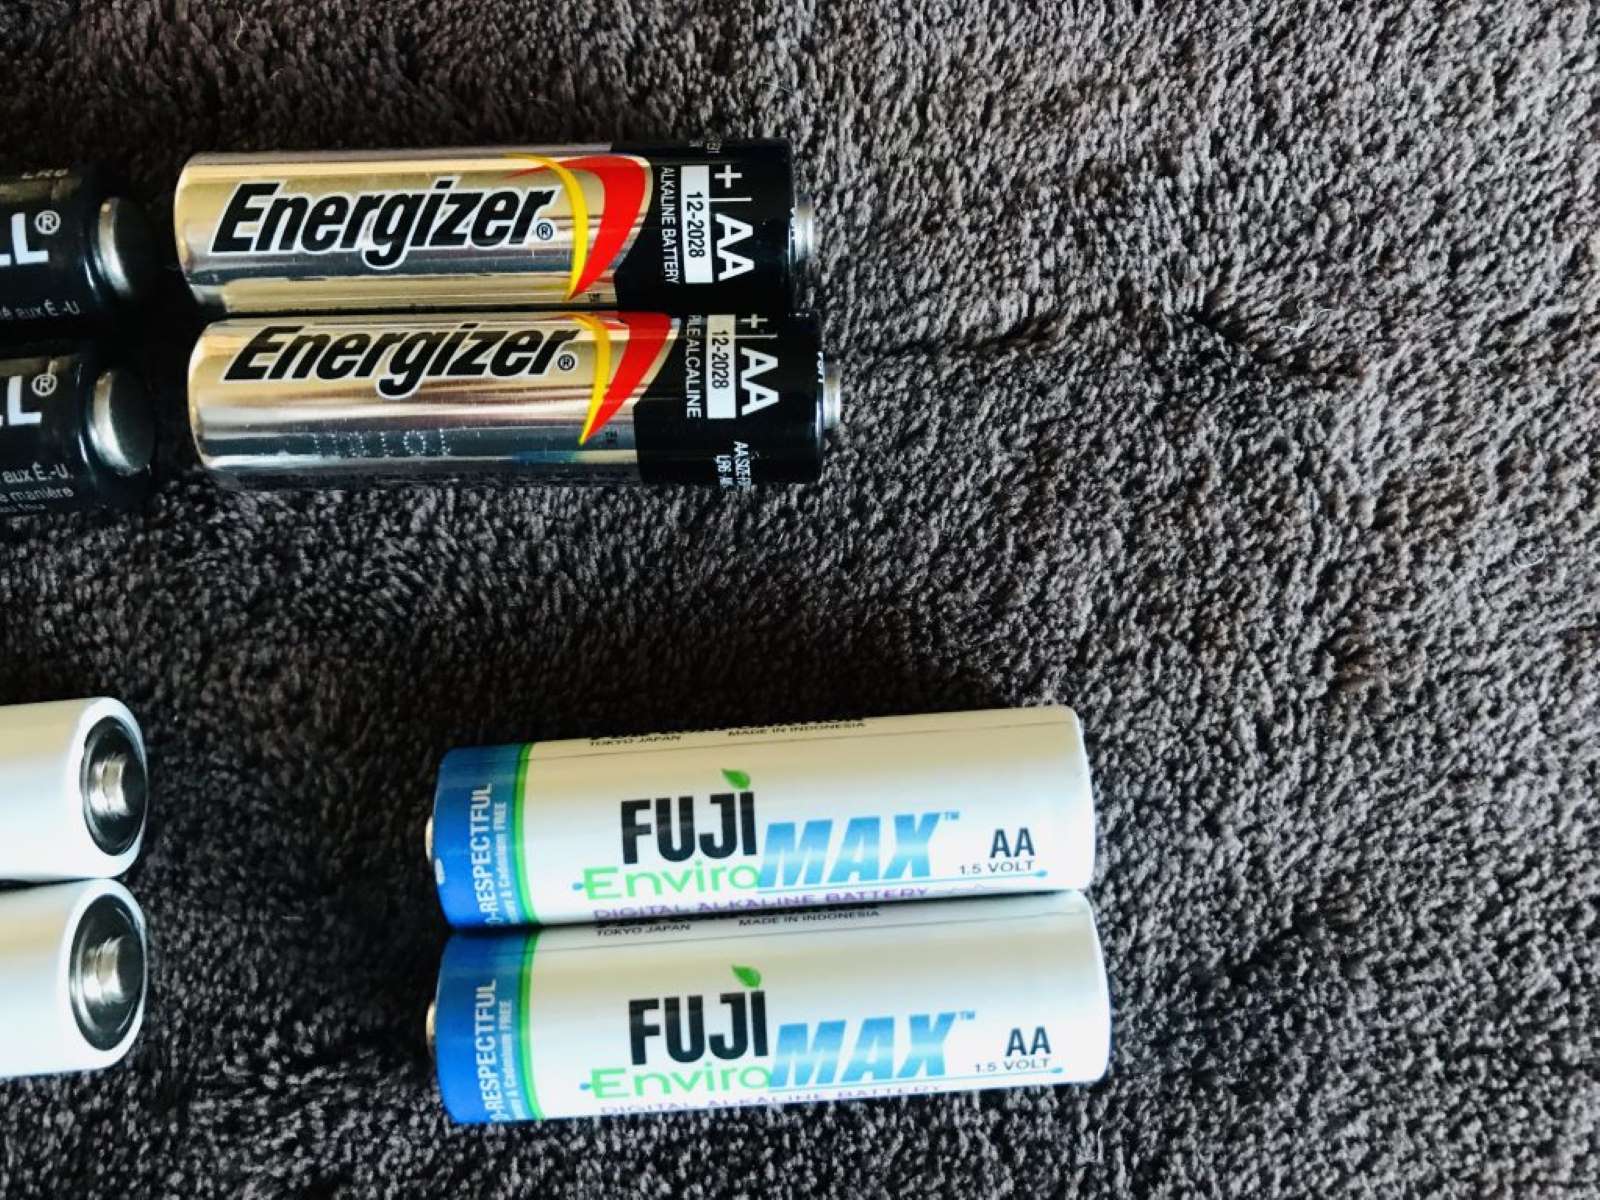 AA Power: Estimating The Lifespan Of AA Batteries